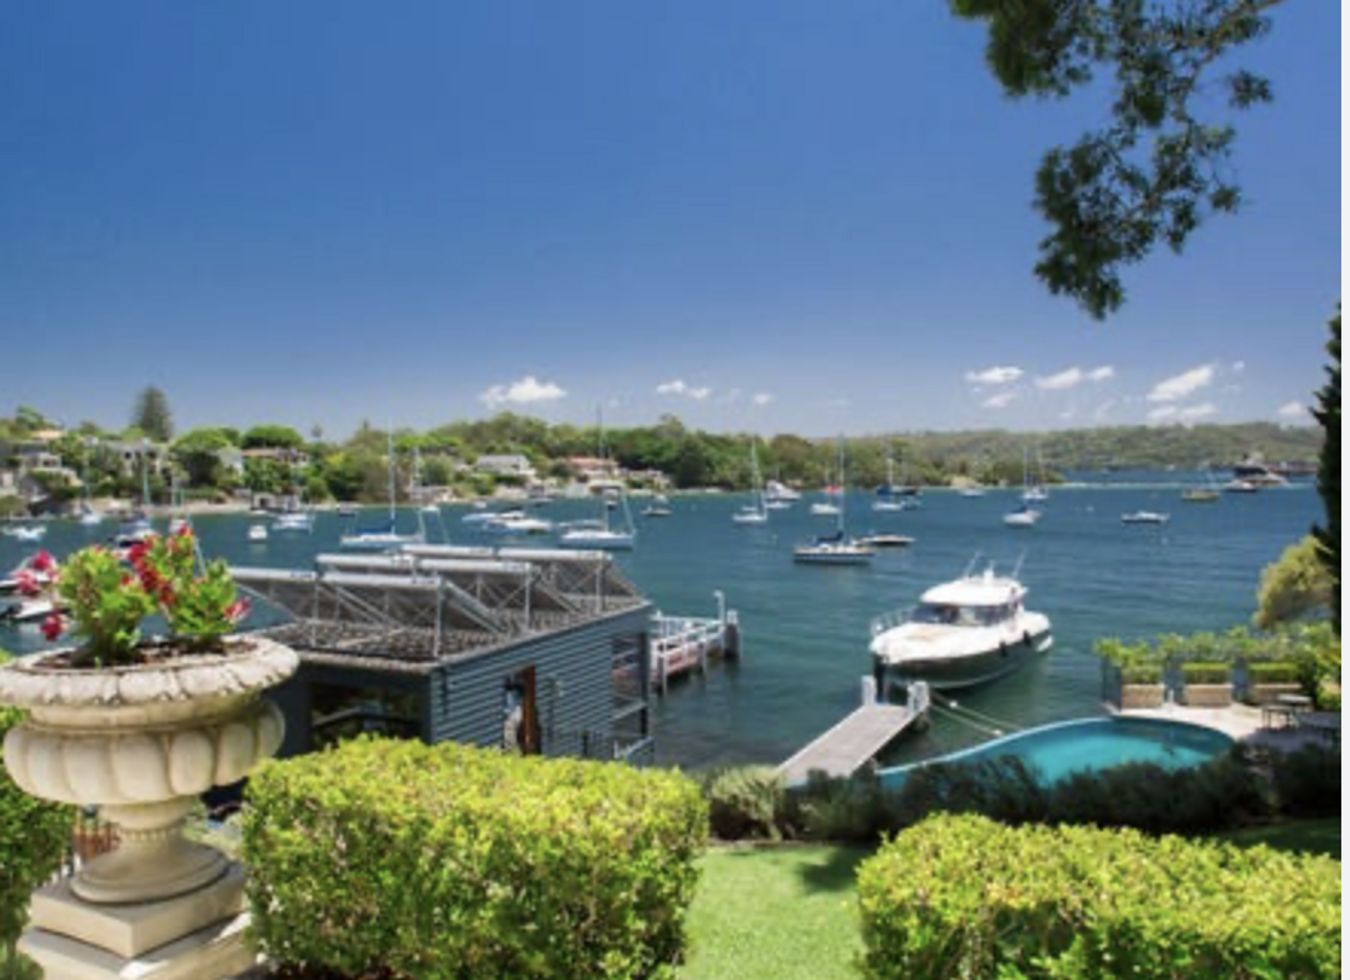 Triguboff lists his Kerry Hill-designed, deep waterfront property in Vaucluse - The Australian